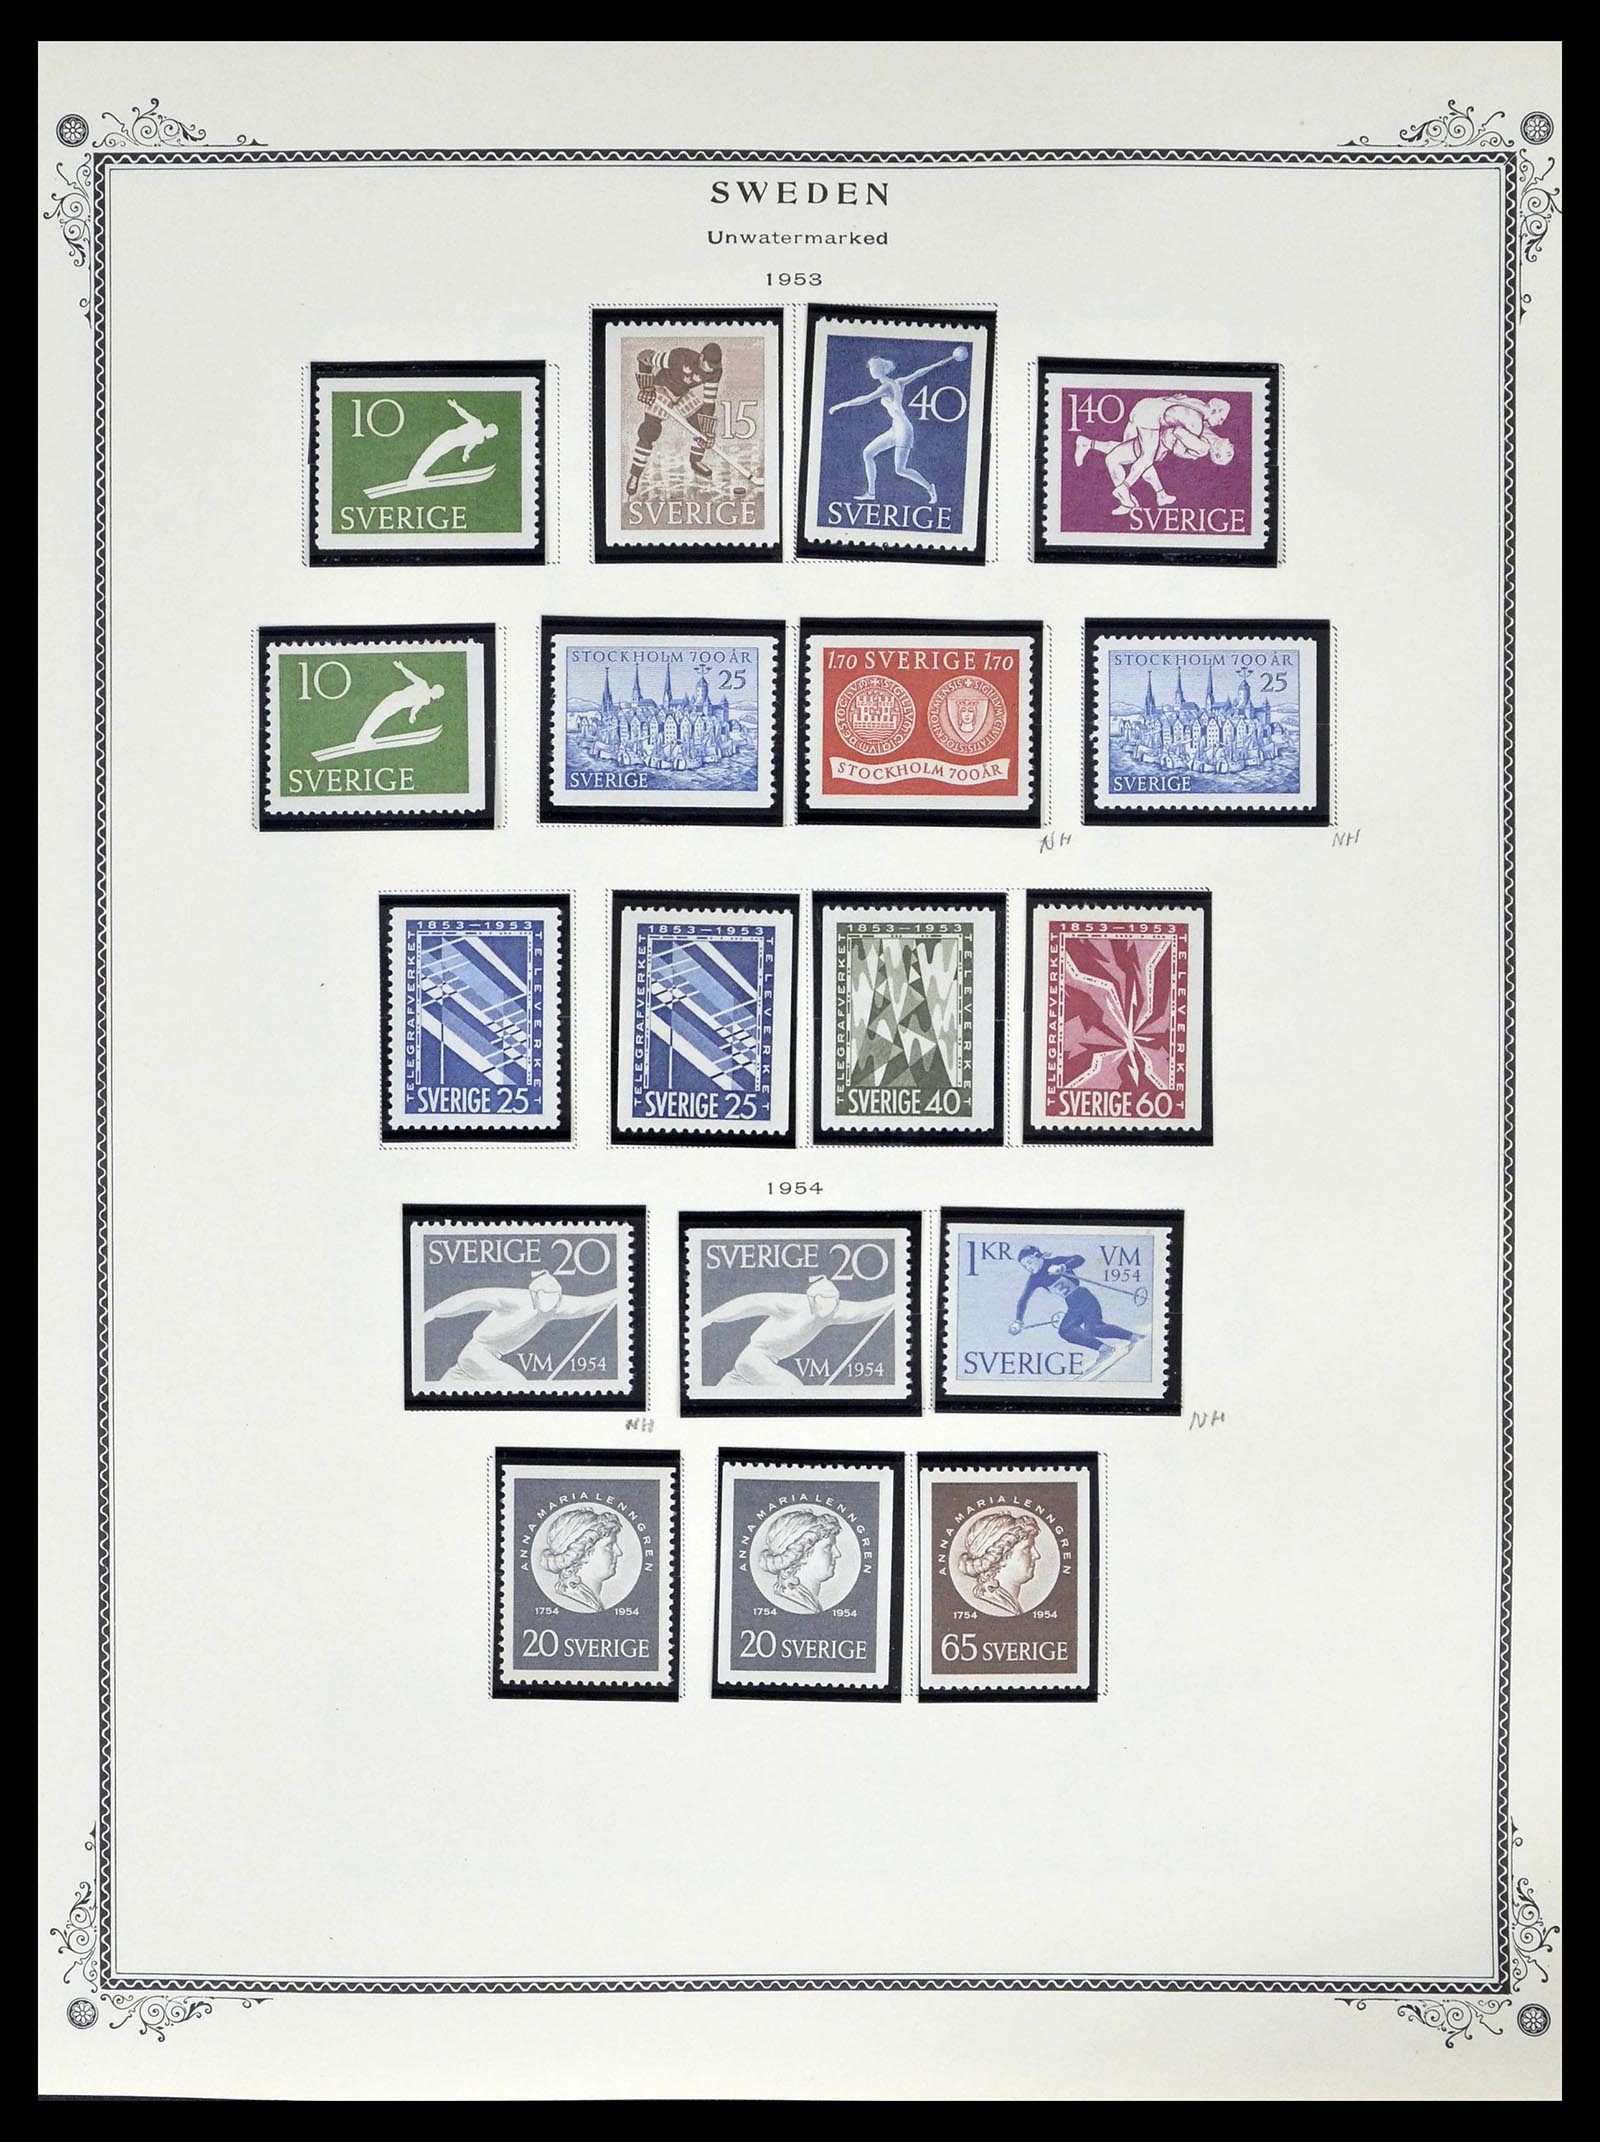 39179 0041 - Stamp collection 39179 Sweden 1855-1997.